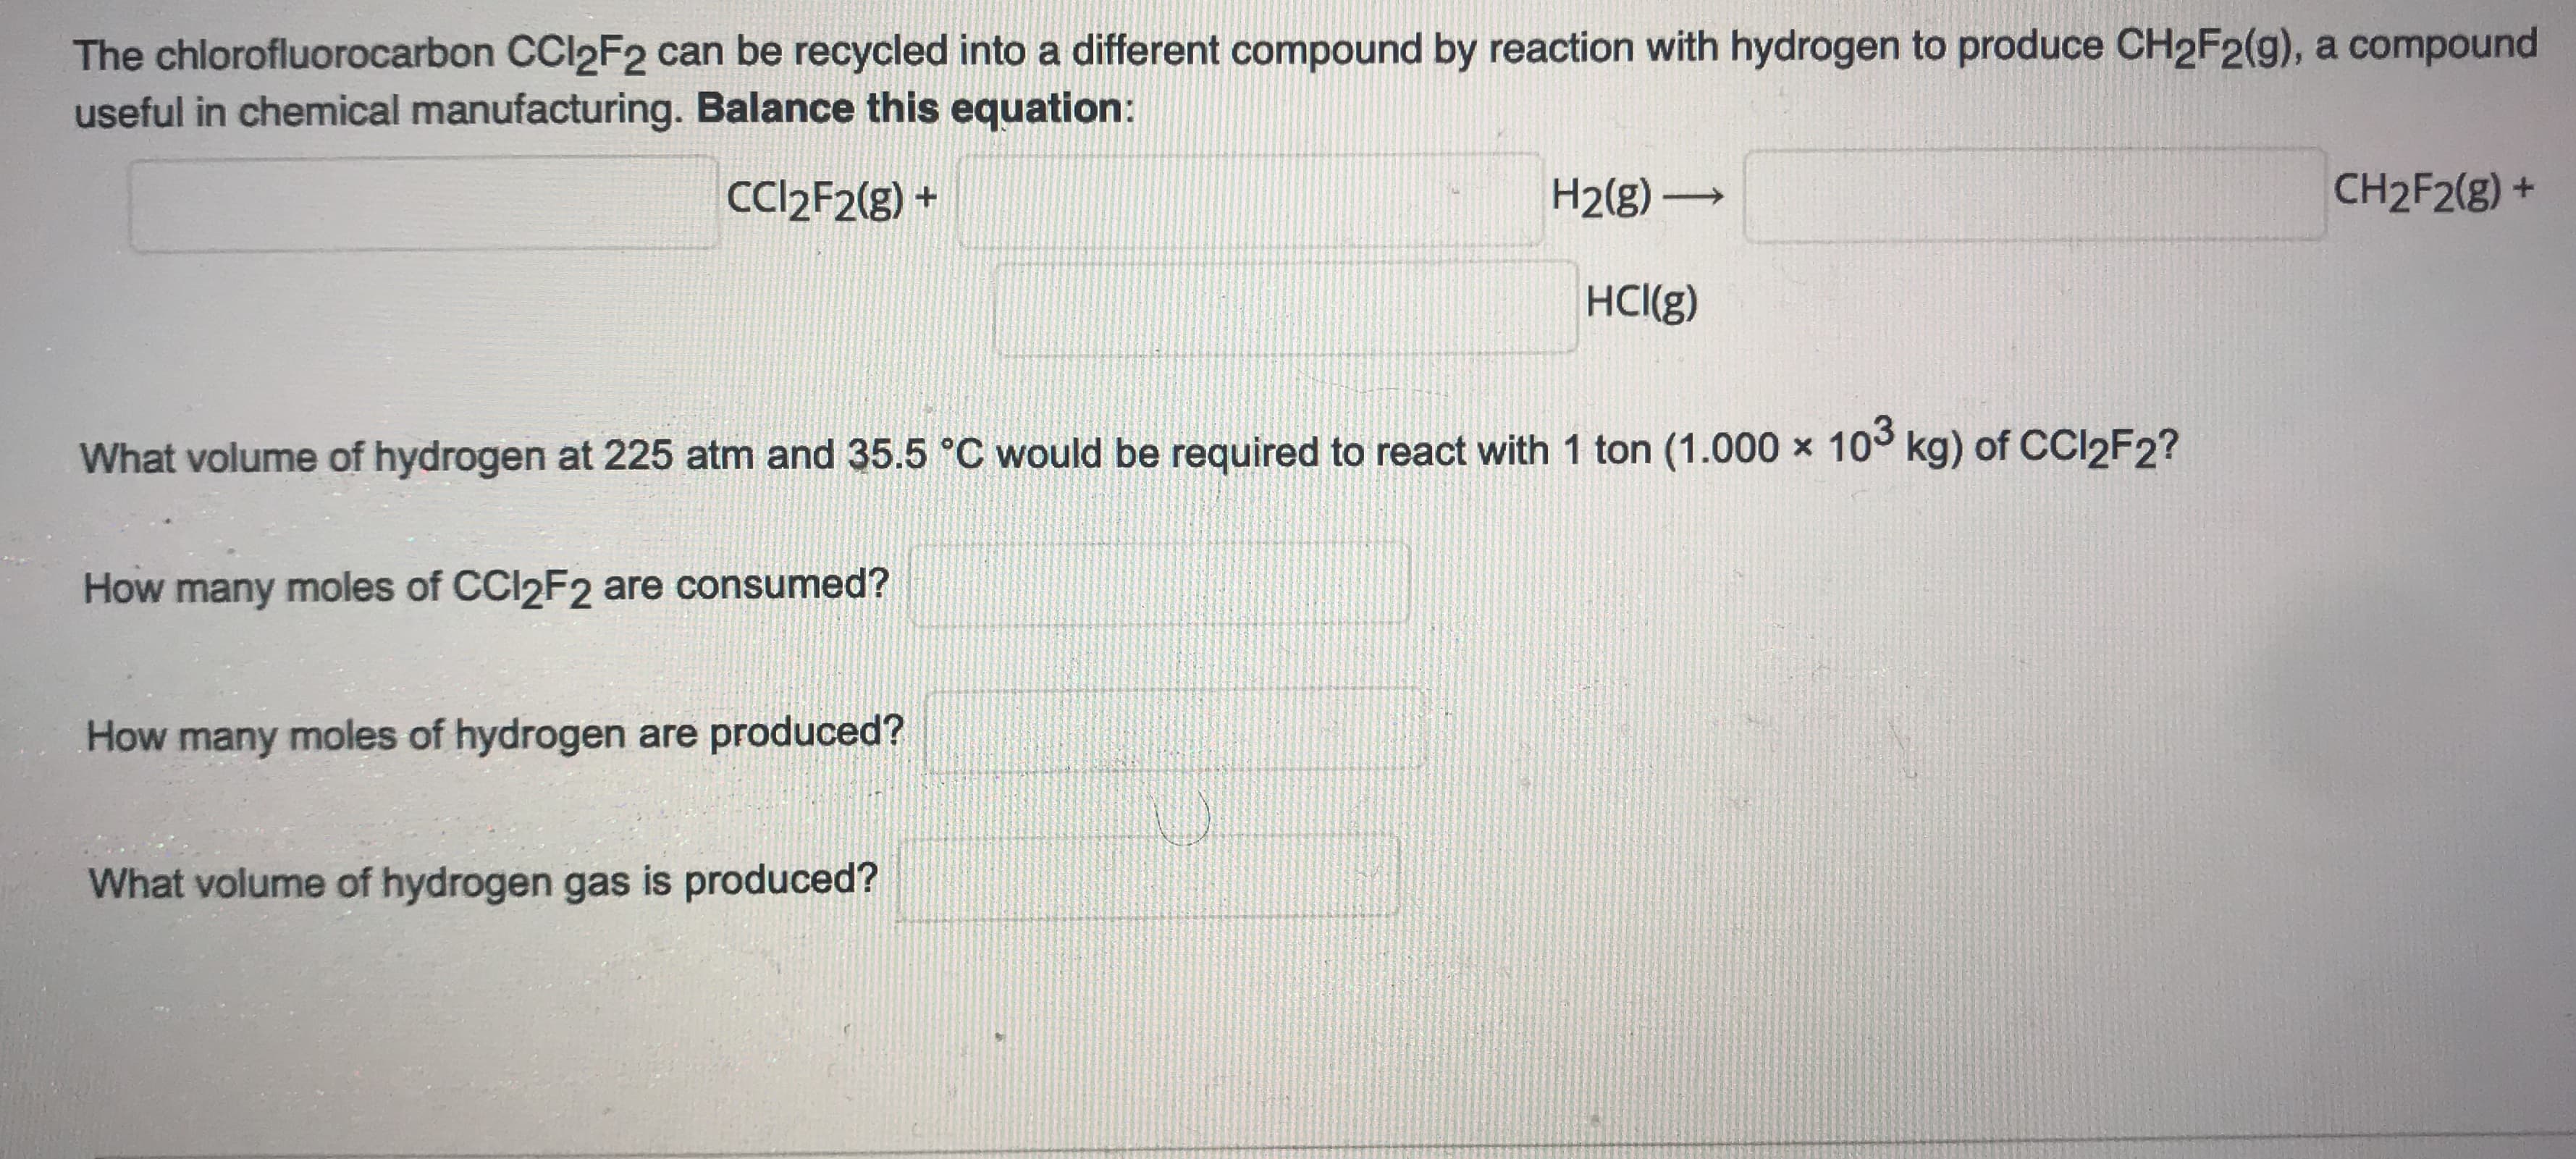 What volume of hydrogen at 225 atm and 35.5 °C would be required to react with 1 ton (1.000 x 10° kg) of CCI2F2?
How many moles of CCI2F2 are consumed?
How many moles of hydrogen are produced?
What volume of hydrogen gas is produced?
